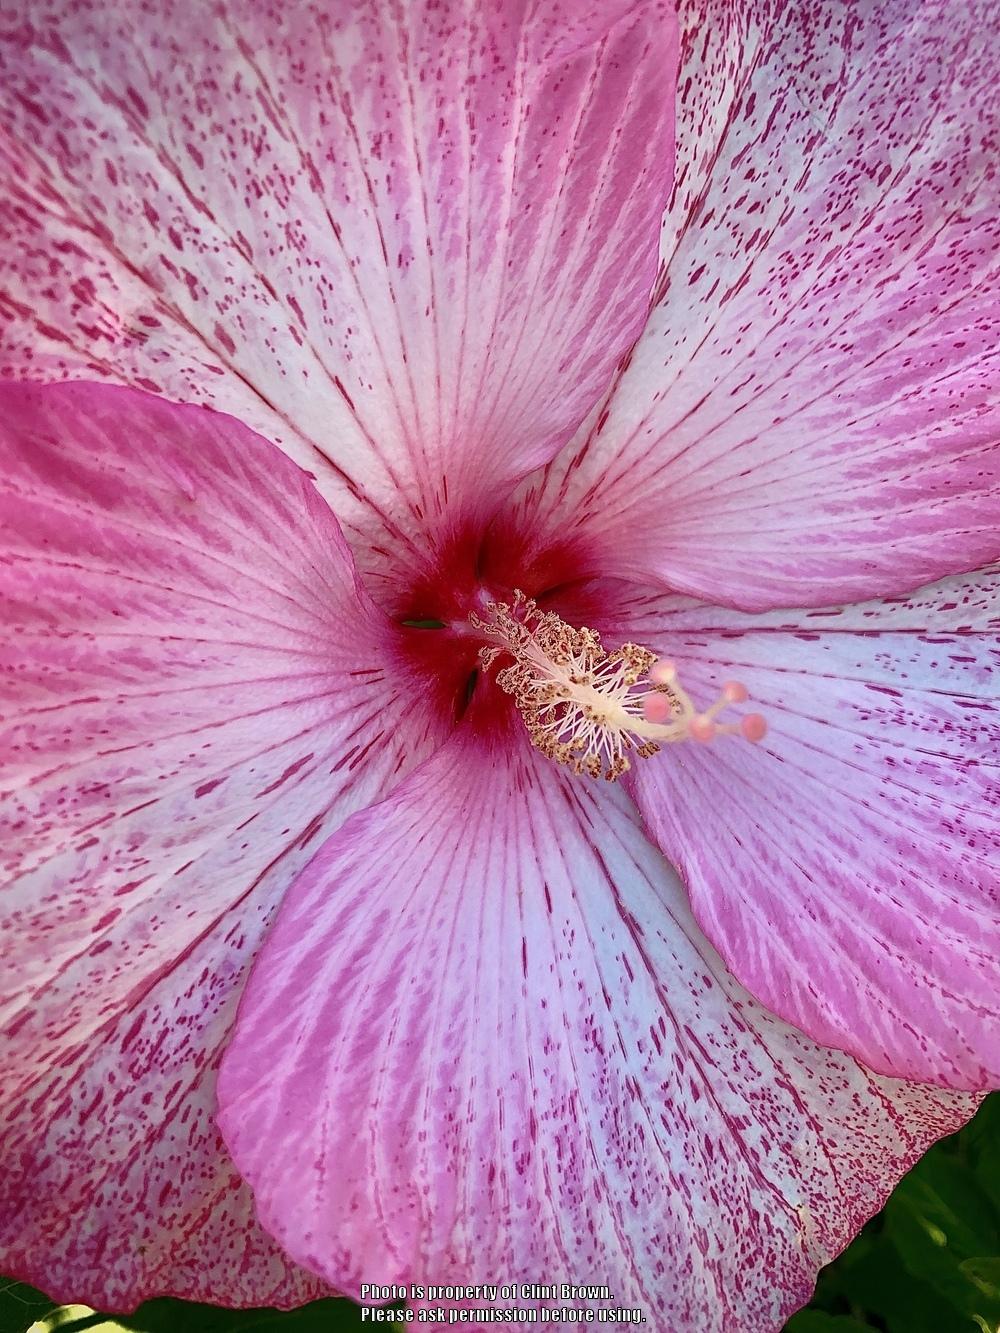 Photo of Hybrid Hardy Hibiscus (Hibiscus 'Pink Comet') uploaded by clintbrown